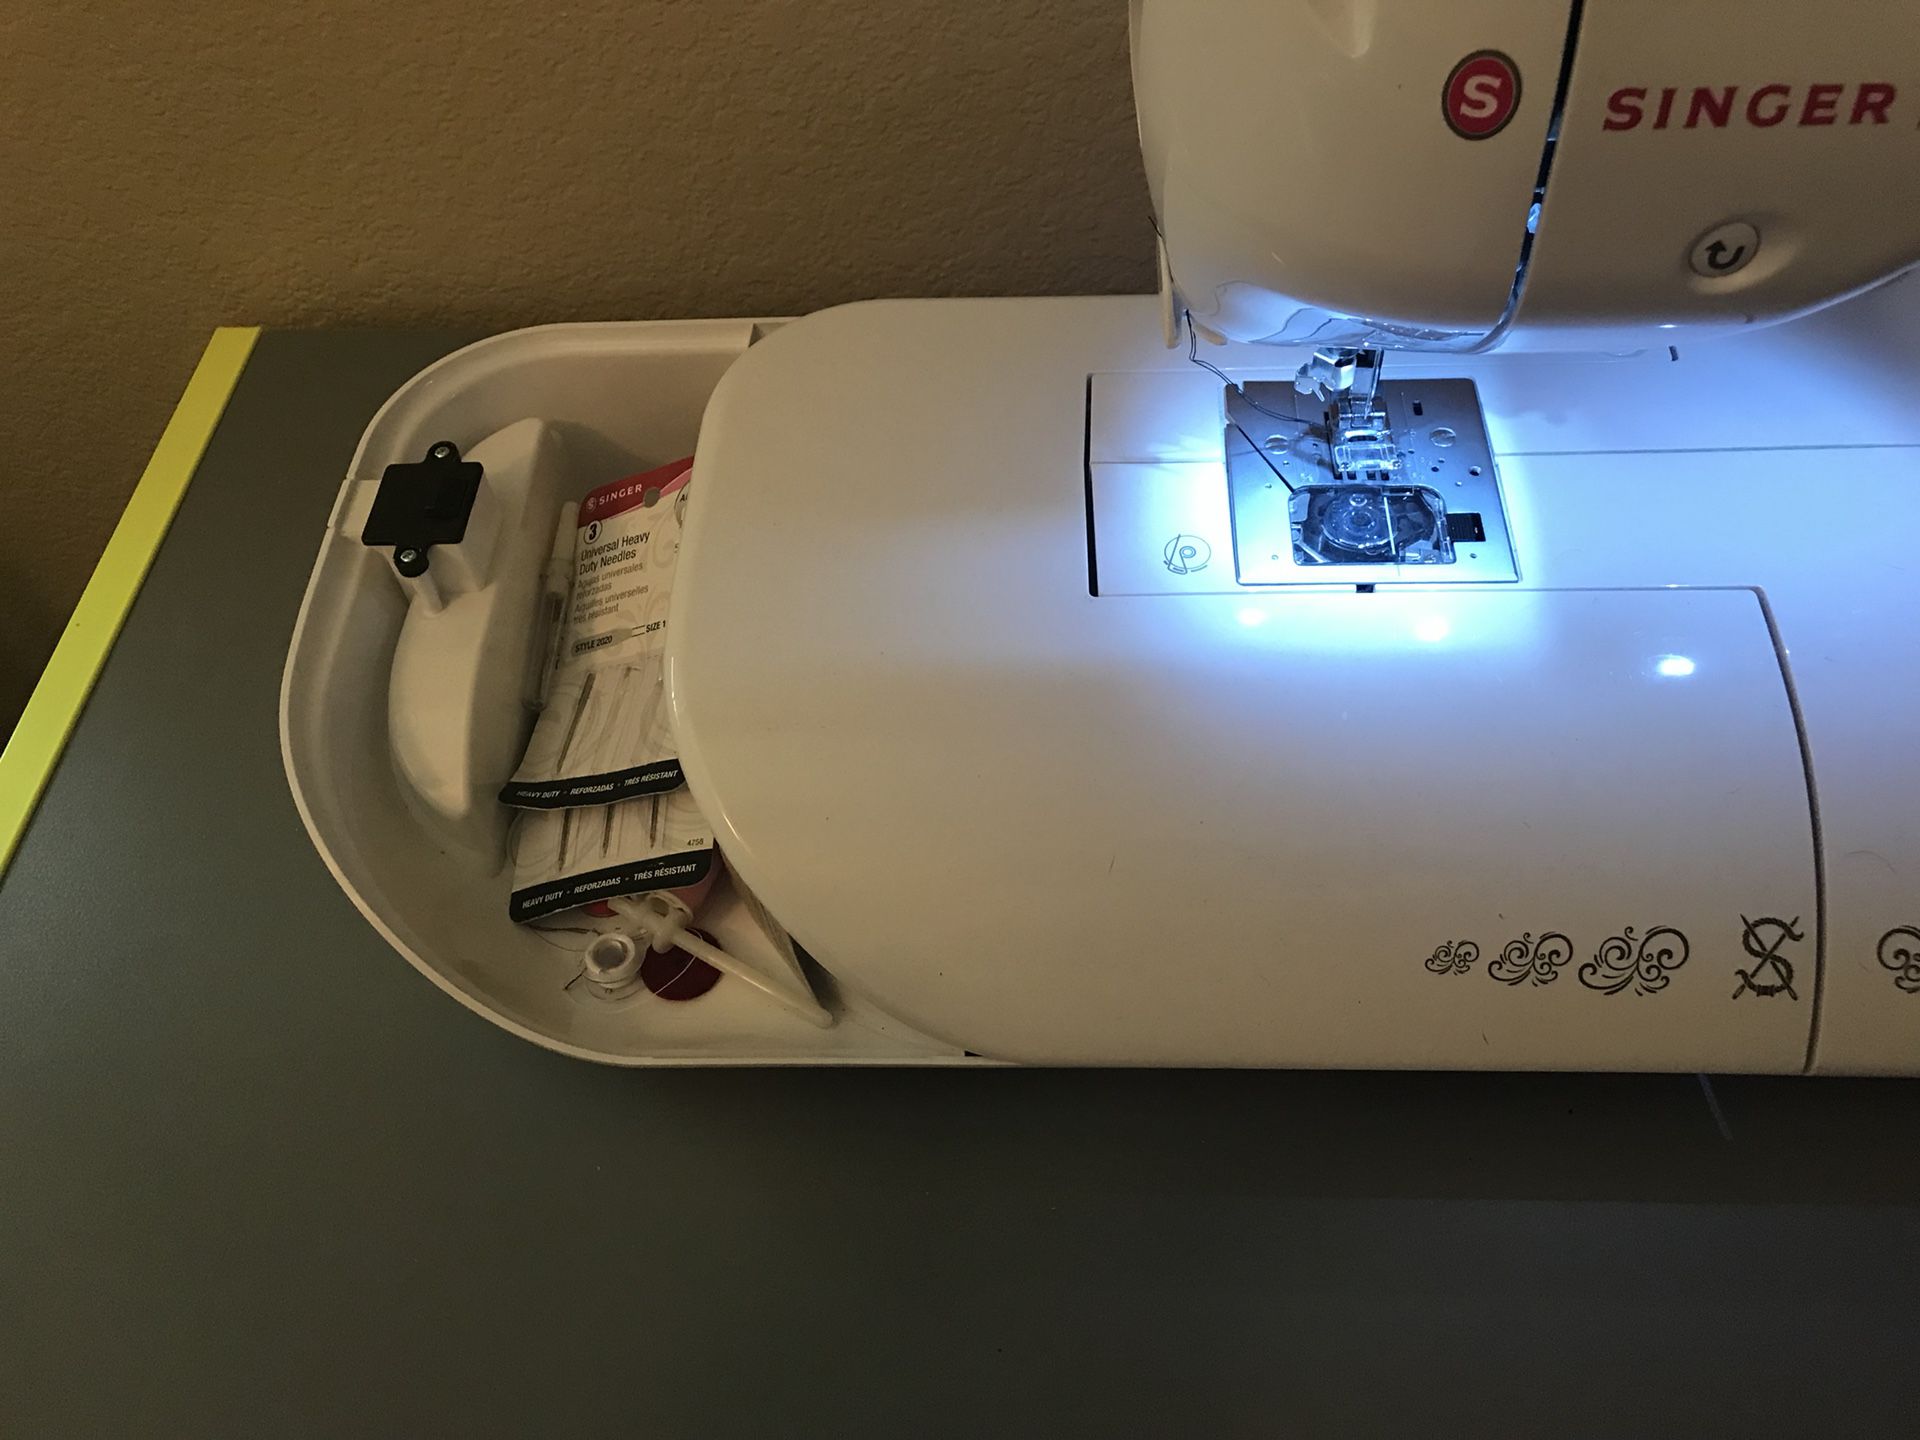 Singer 70th anniversary sewing machine for Sale in Fort Collins, CO ...